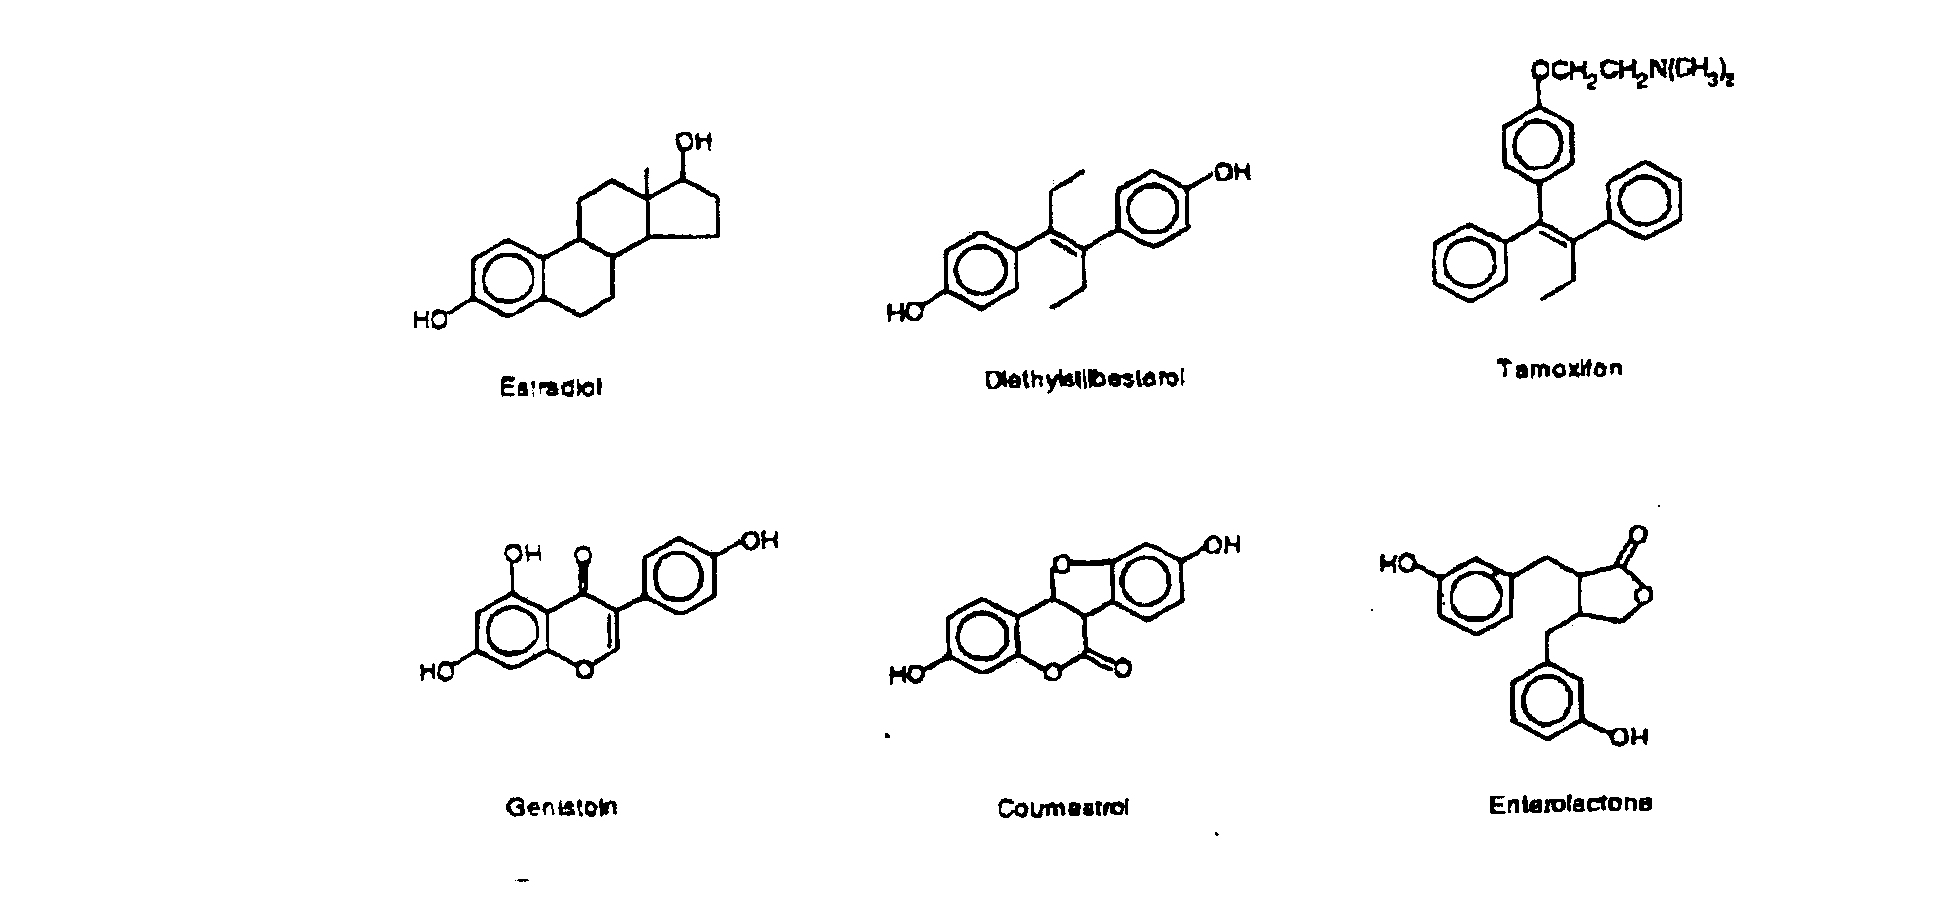 Composition containing Vitamin D and phytoestrogens